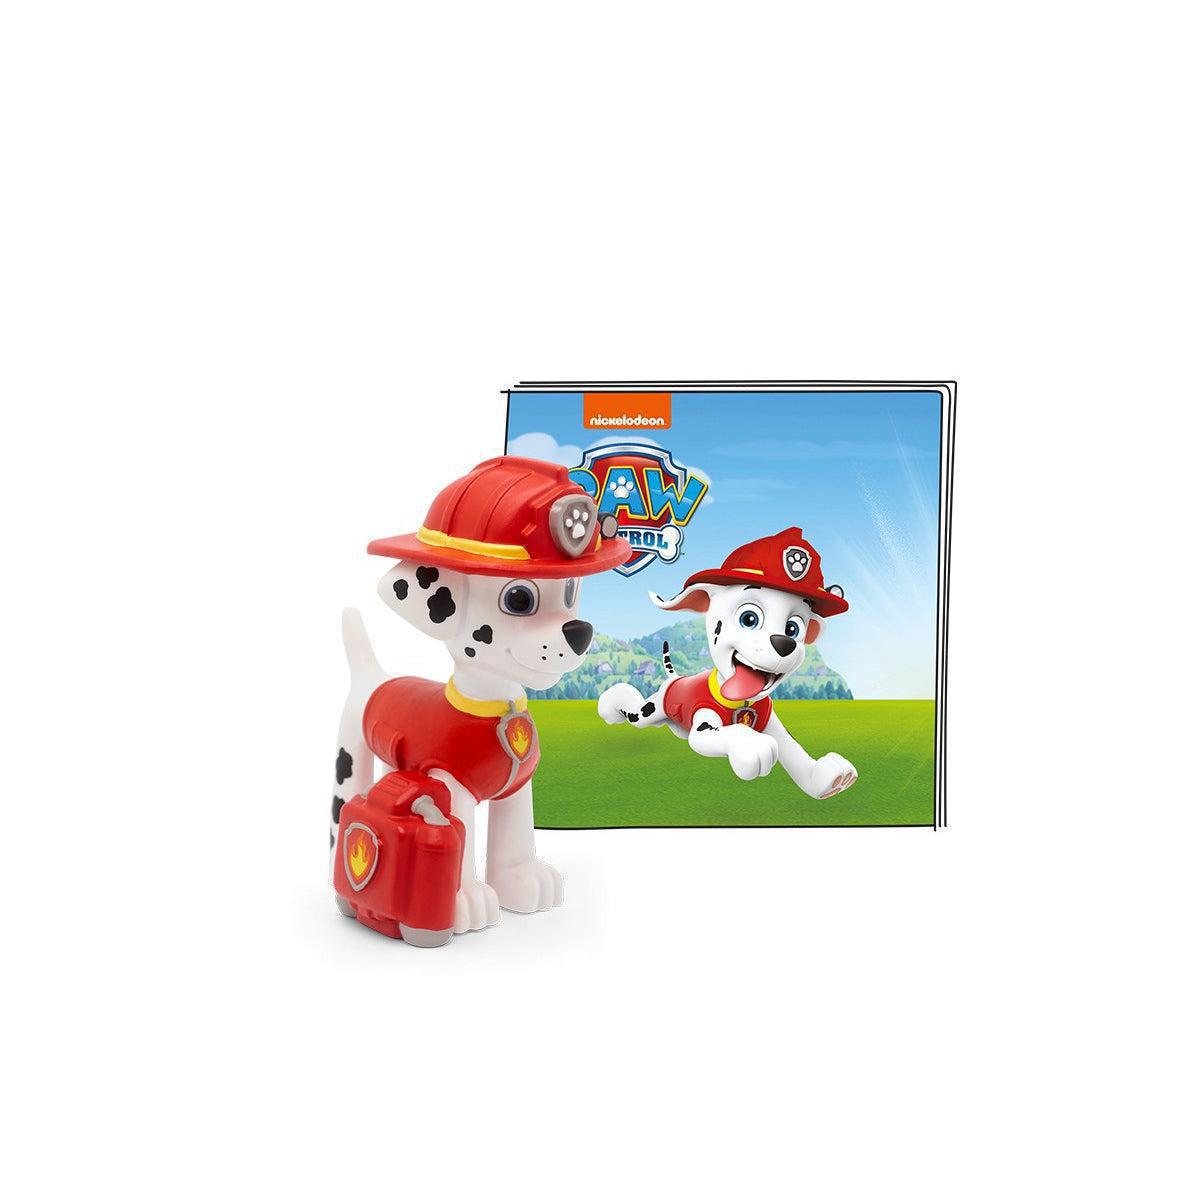 Tonies Paw Patrol - Marshall - Audio Character for use with Toniebox Player